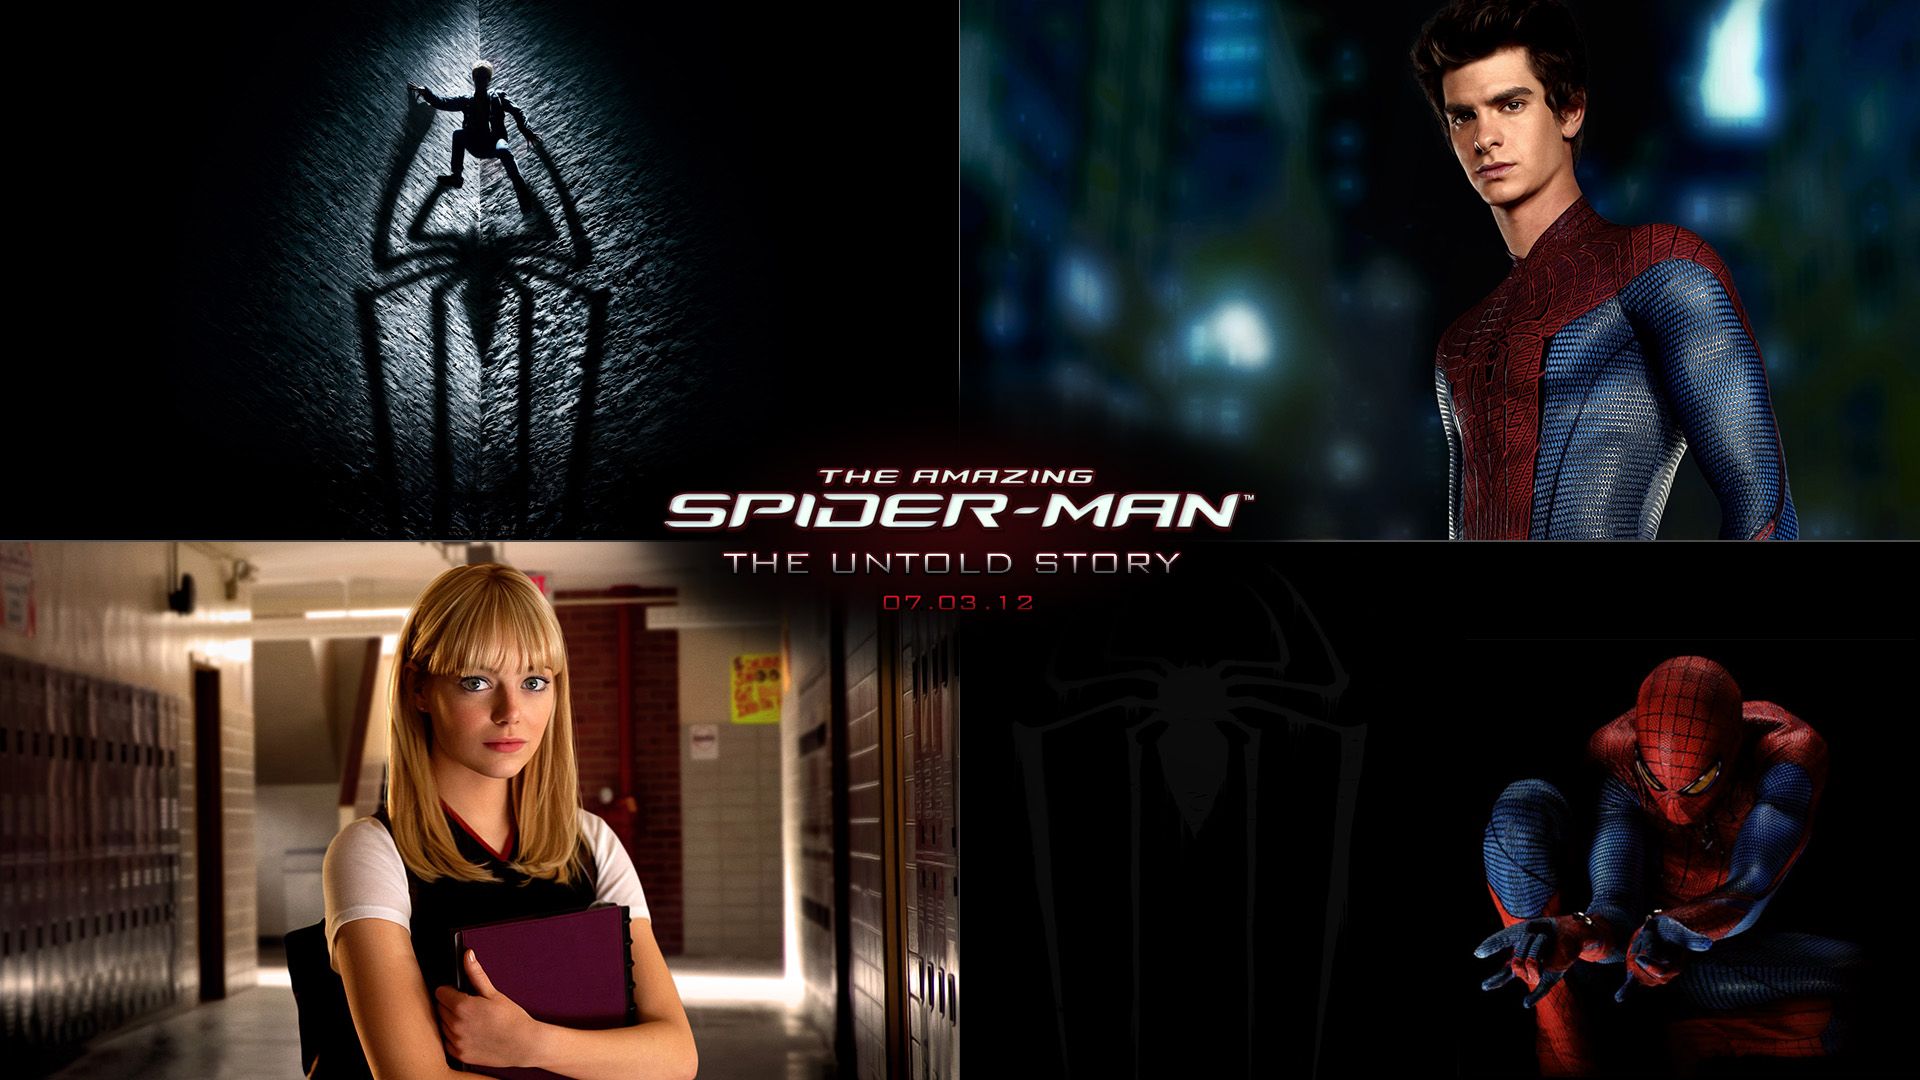 The Amazing Spider Man Collage Wallpaper - Upcoming Movies